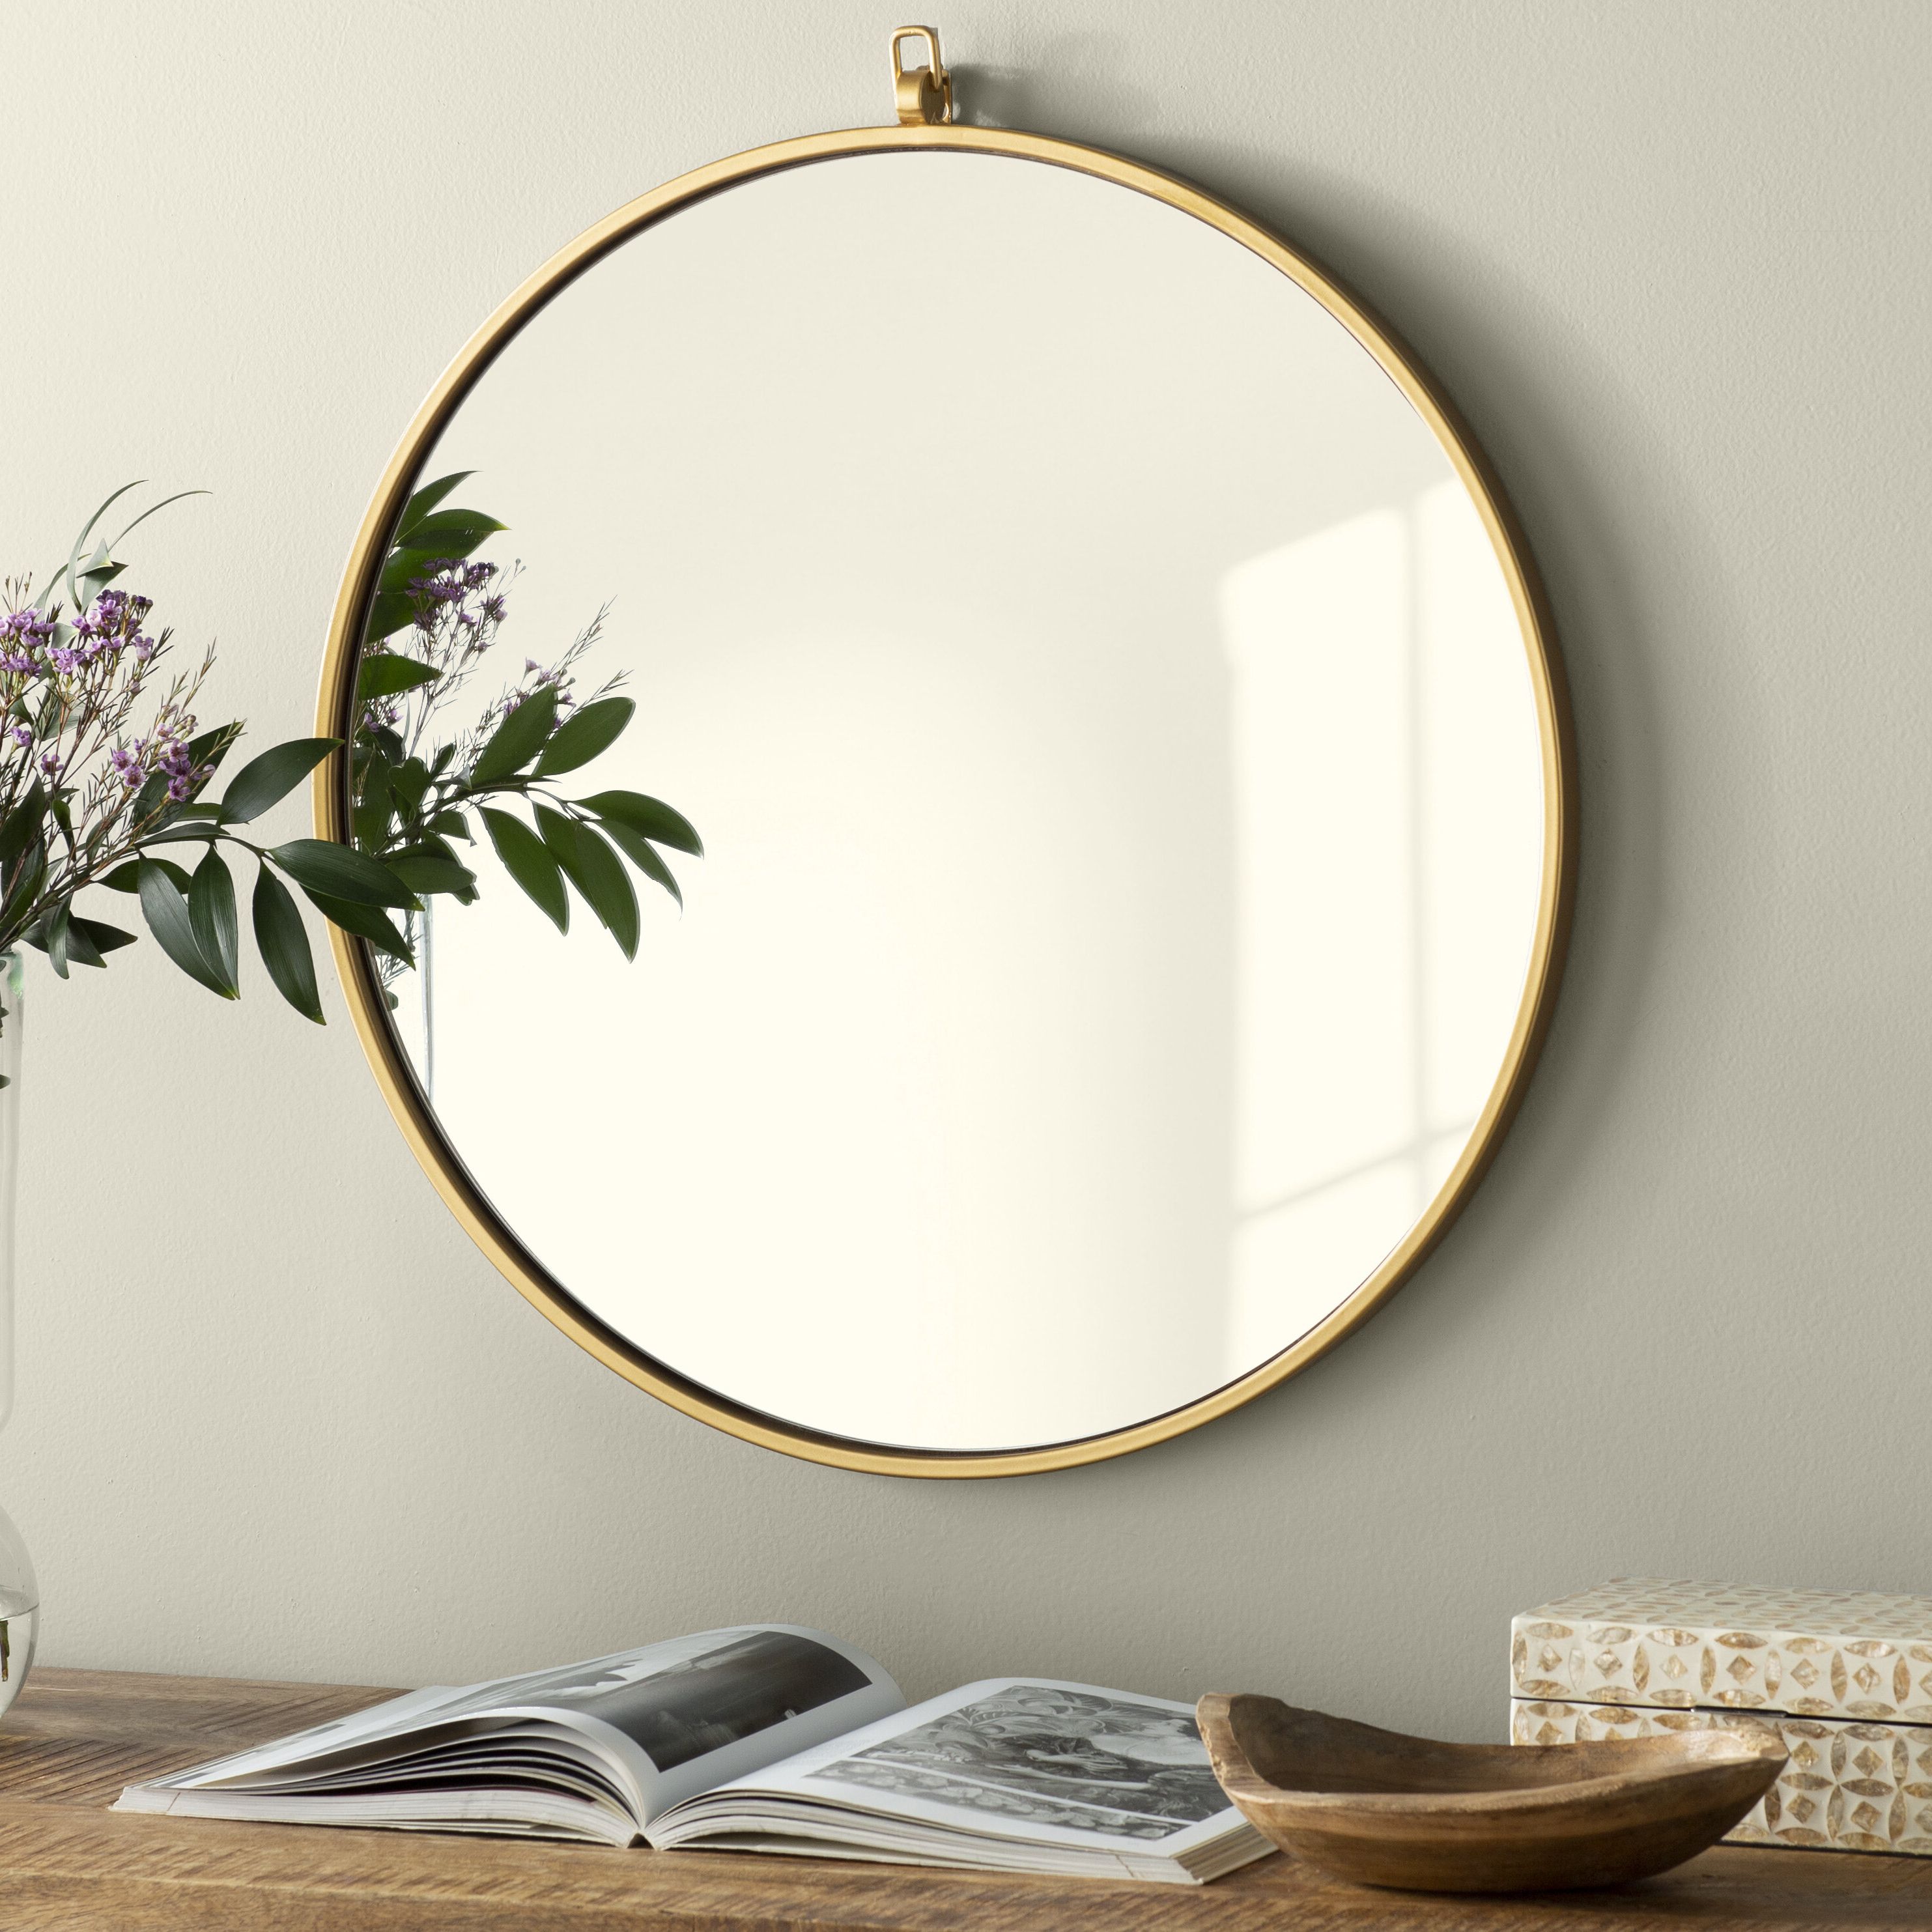 Tanner Accent Mirrors For Well Known Tanner Accent Mirror In 2019 For The House T Mirrors (View 2 of 20)